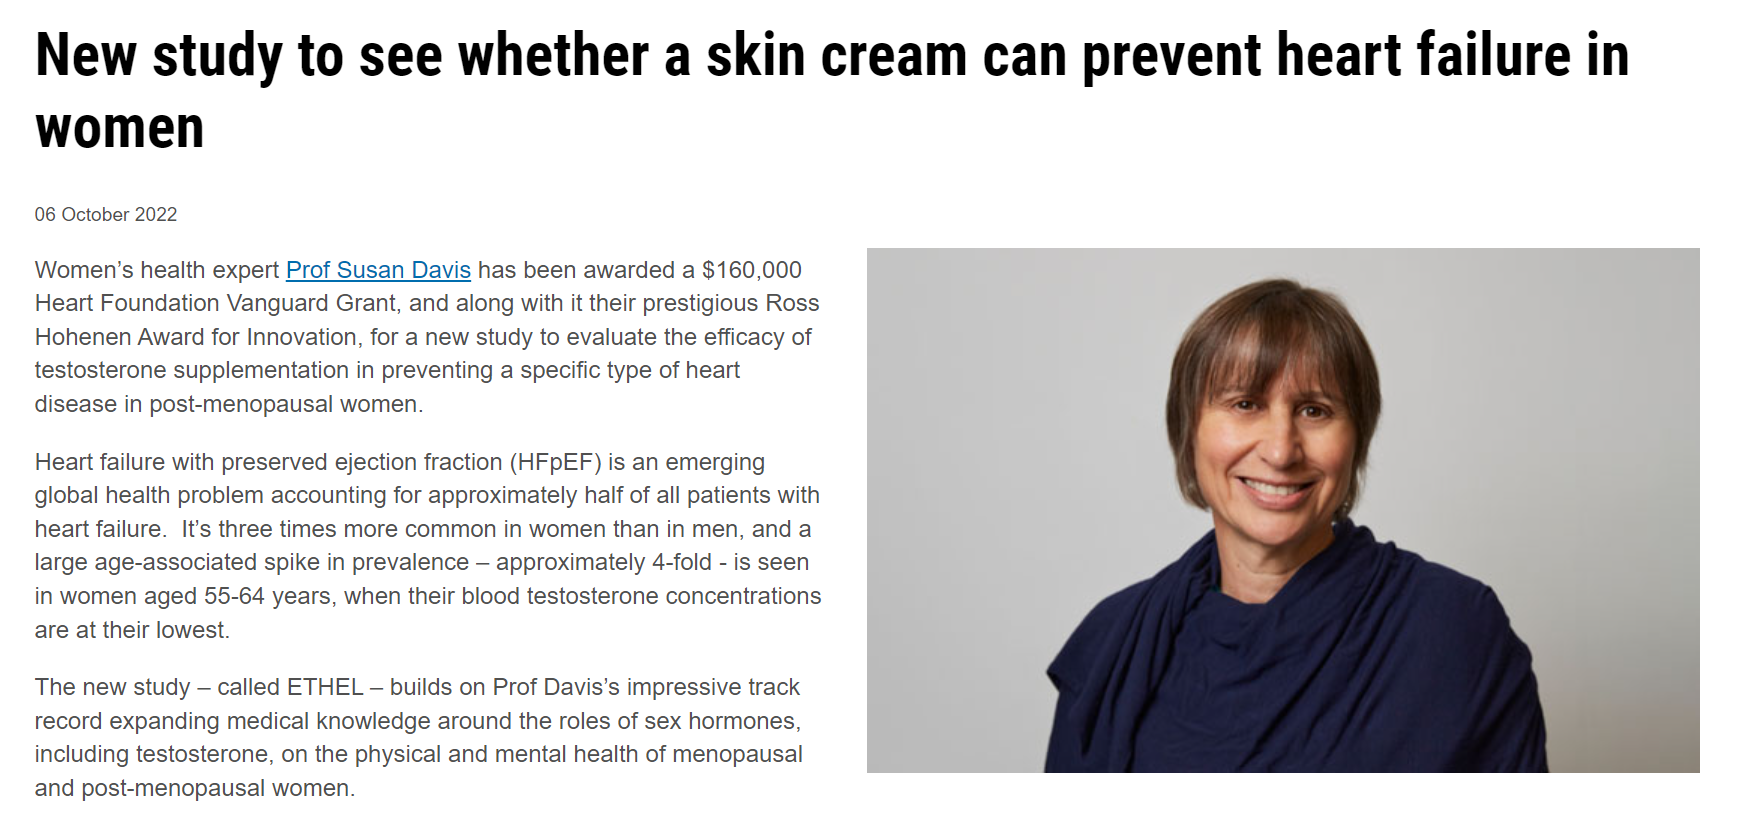 Monash University – New study to see whether a skin cream can prevent heart failure in women thumbnail